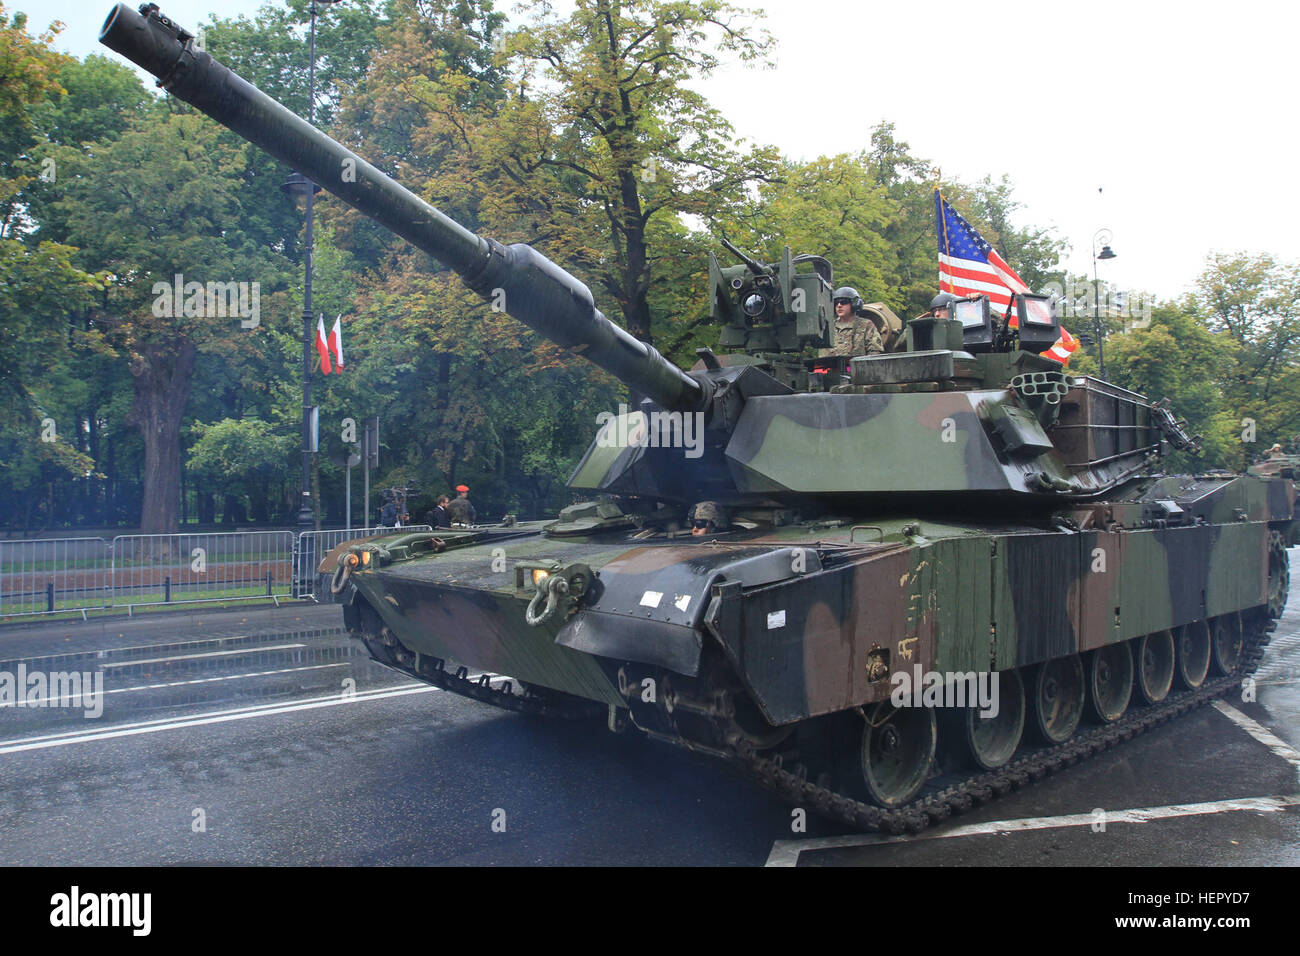 WARSAW, Poland – Soldiers of Company D, 3rd Combined Arms Battalion, 69th Armor Regiment, 3rd Infantry Division, based out of Ft. Stewart, Ga., drive a M1A2 Abrams tank during the Polish Armed Forces Day Parade in Warsaw, Poland, Aug. 15, 2016. The parade, held annually in the capital, commemorates the 96th anniversary of the Polish victory over Soviet Russia at the Battle of Warsaw in 1920 during the Polish-Soviet War. The D Co. “Dark Knights” stationed out of Fort Stewart, Ga., are currently on a training rotation in support of Operation Atlantic Resolve,  a U.S. led effort in Eastern Europe Stock Photo